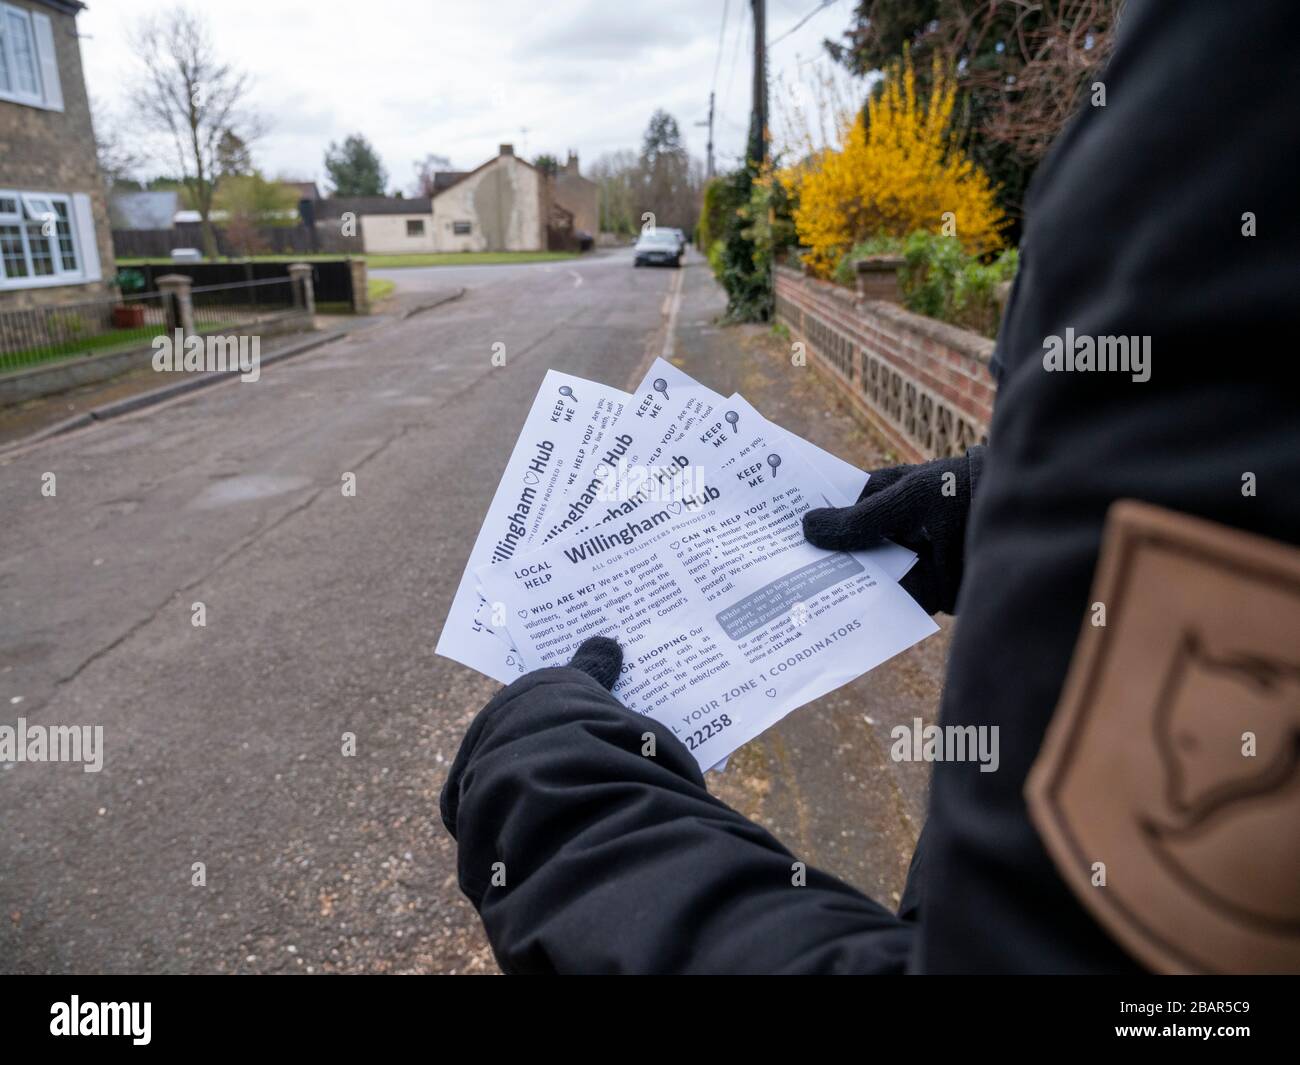 Willingham, Cambridgeshire, UK. 29th Mar, 2020. A volunteer delivers leaflets to houses in the village explaining the local support available to help people in the coronavirus pandemic. The Willingham Hub has been set up by local volunteers to provide support to people during the Covid-19 virus outbreak. Credit: Julian Eales/Alamy Live News Stock Photo